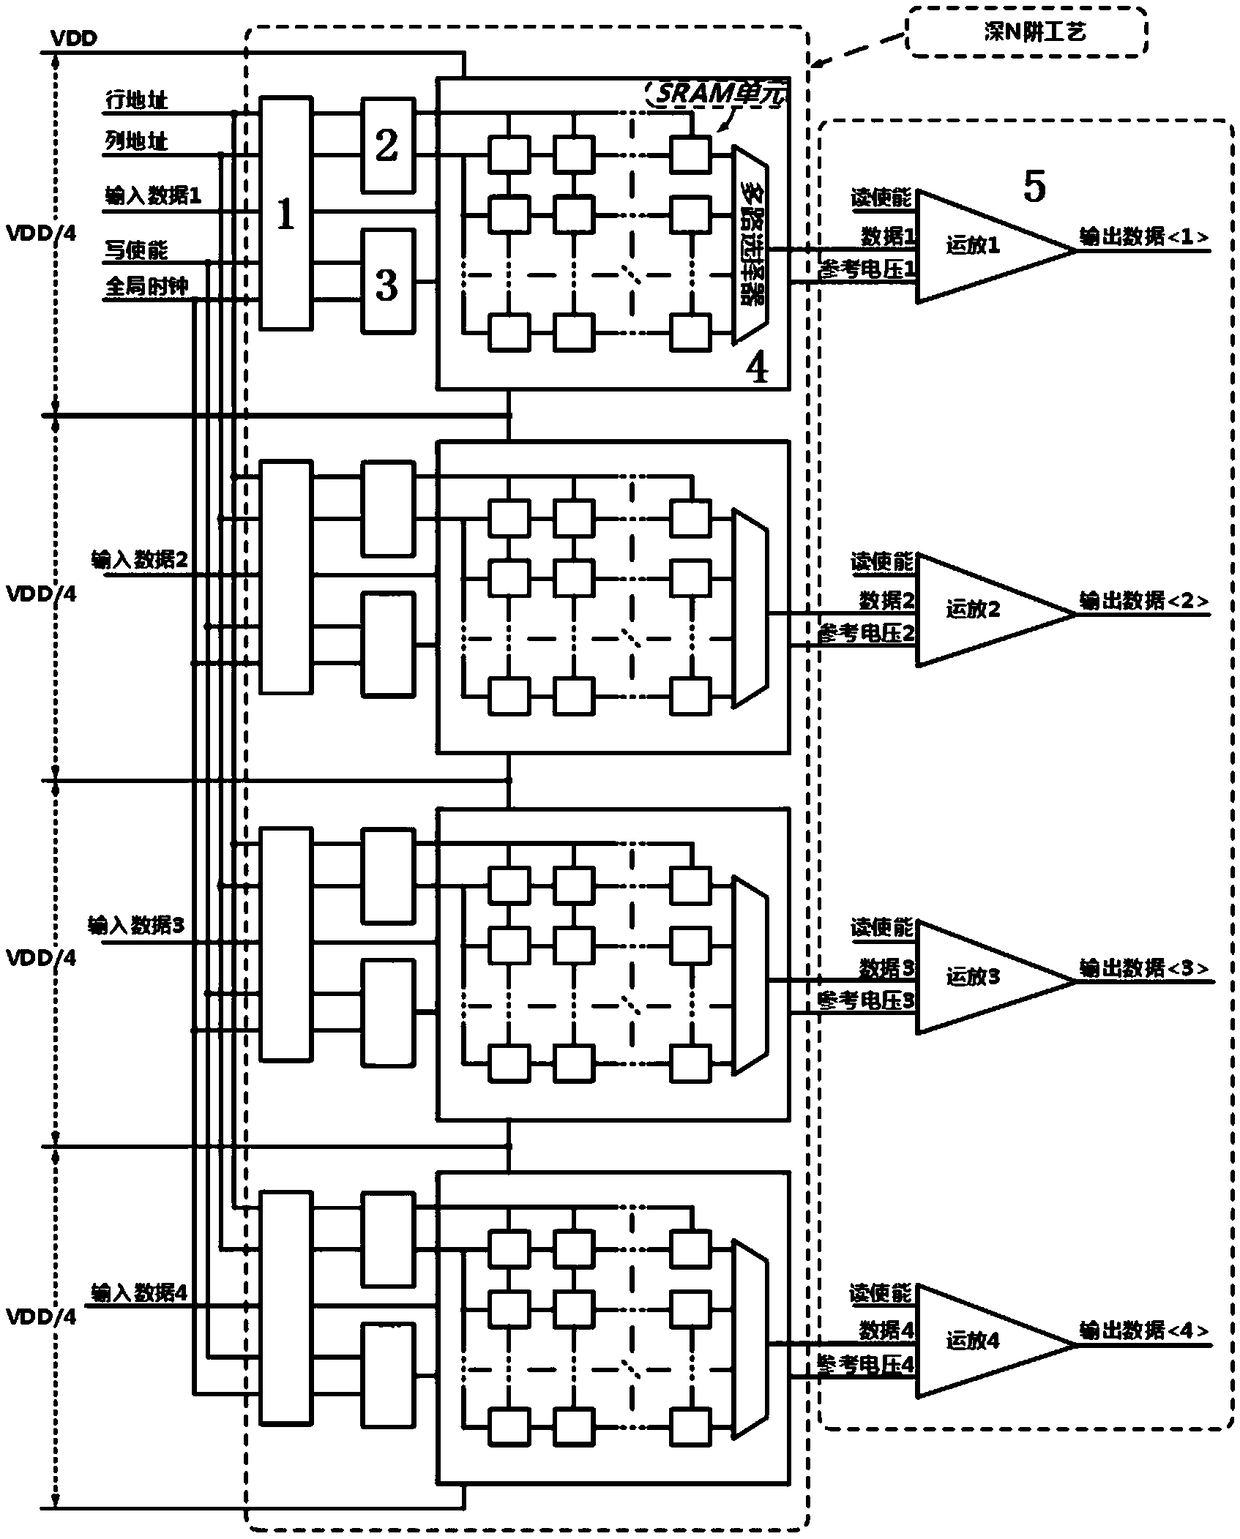 A stacked SRAM array structure with high energy efficiency and low power consumption